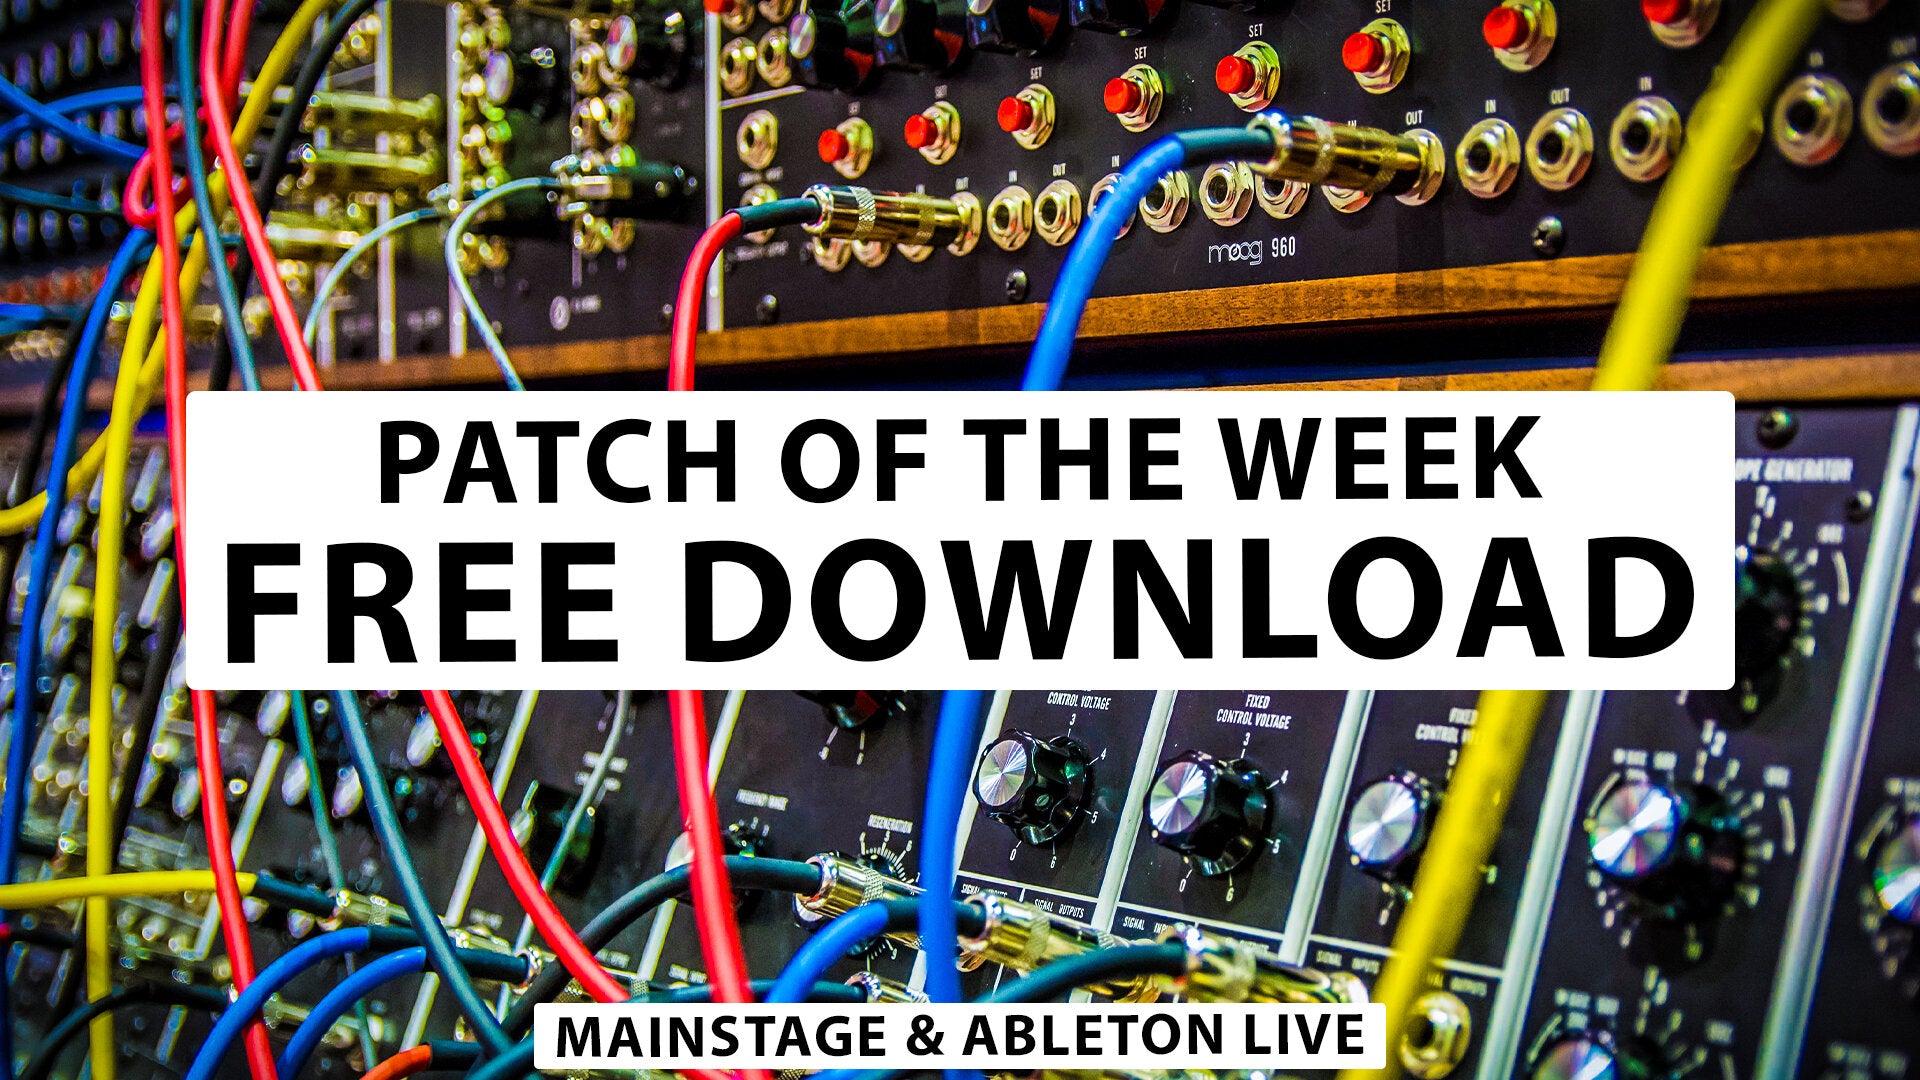 Wiggly Lead - Free MainStage & Ableton Worship Patch!